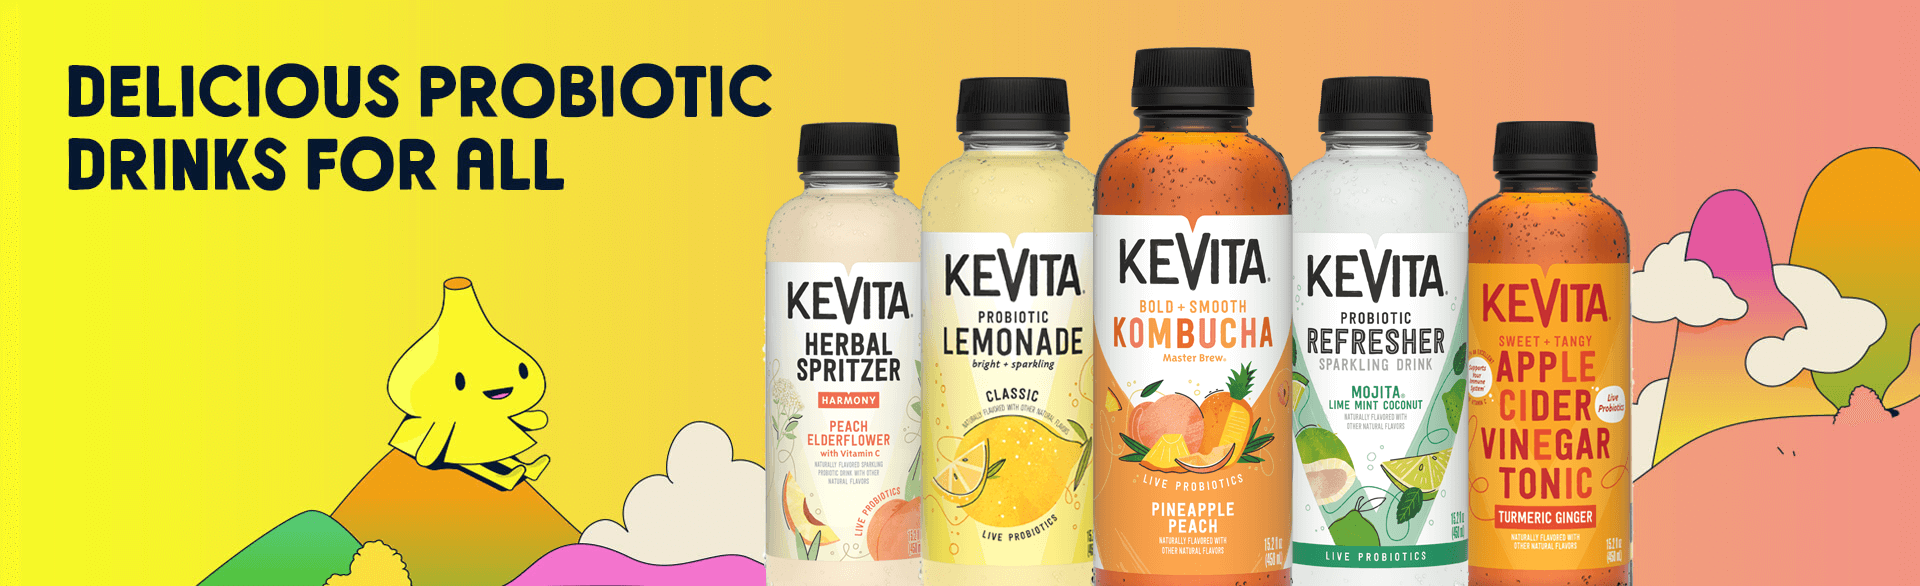 Delicious Probiotic Drinks For All